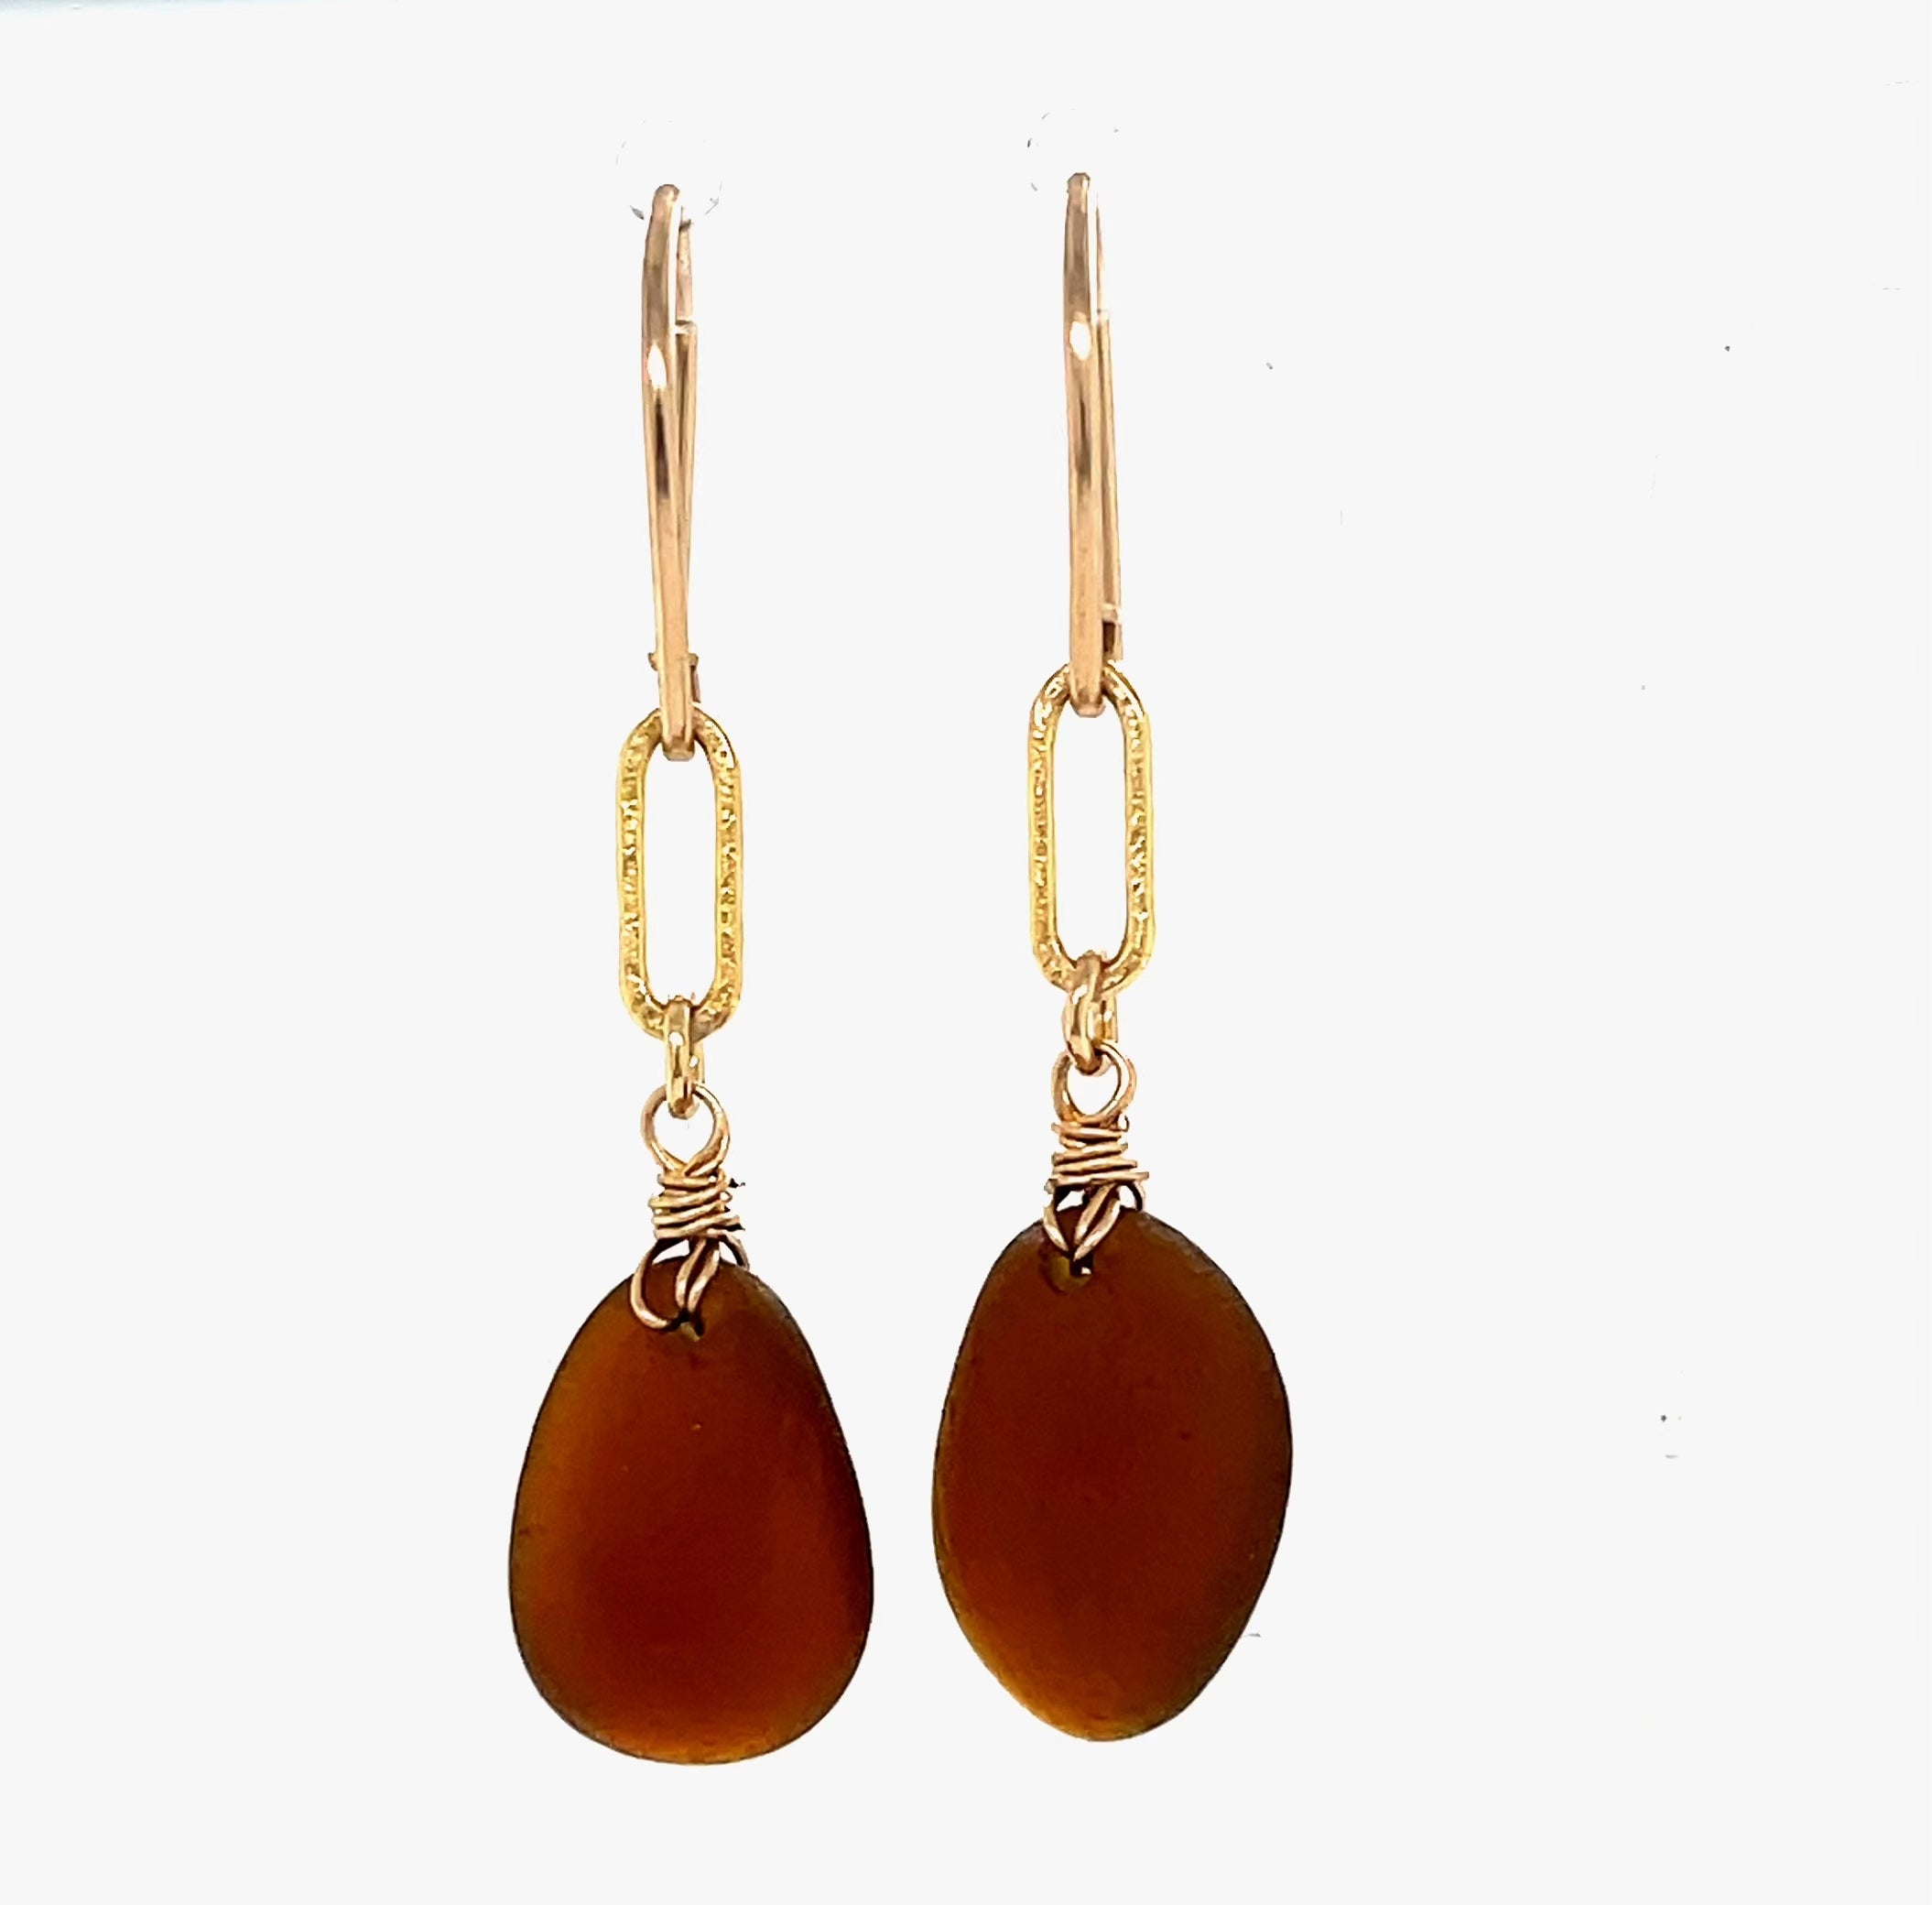 Elegant amber sea glass jewelry: gold drop earrings with natural textures